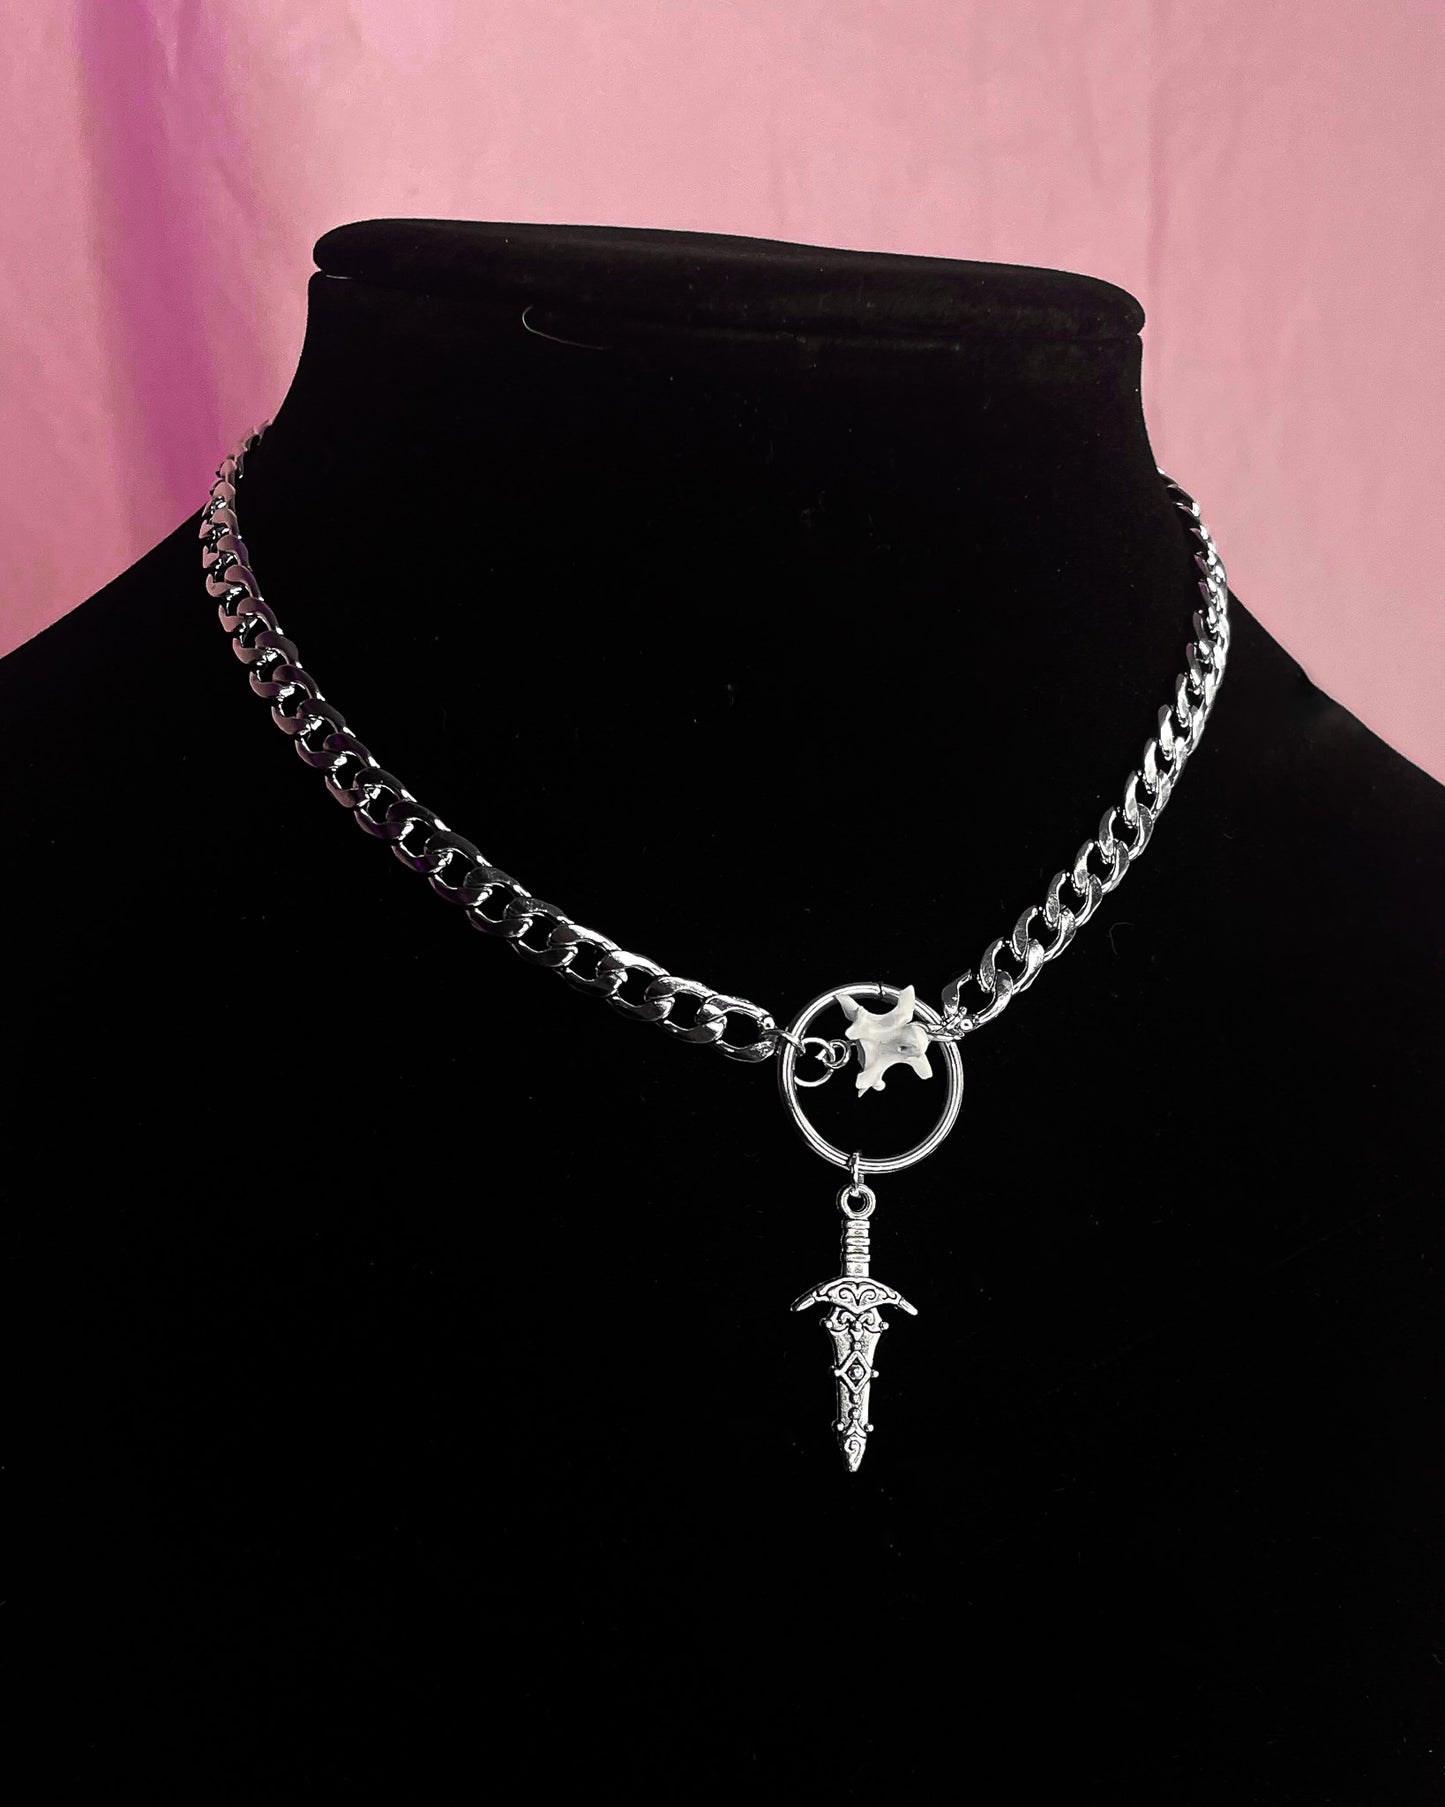 "𝕮𝖆𝖗𝖔𝖑𝖎𝖓𝖊" Necklace